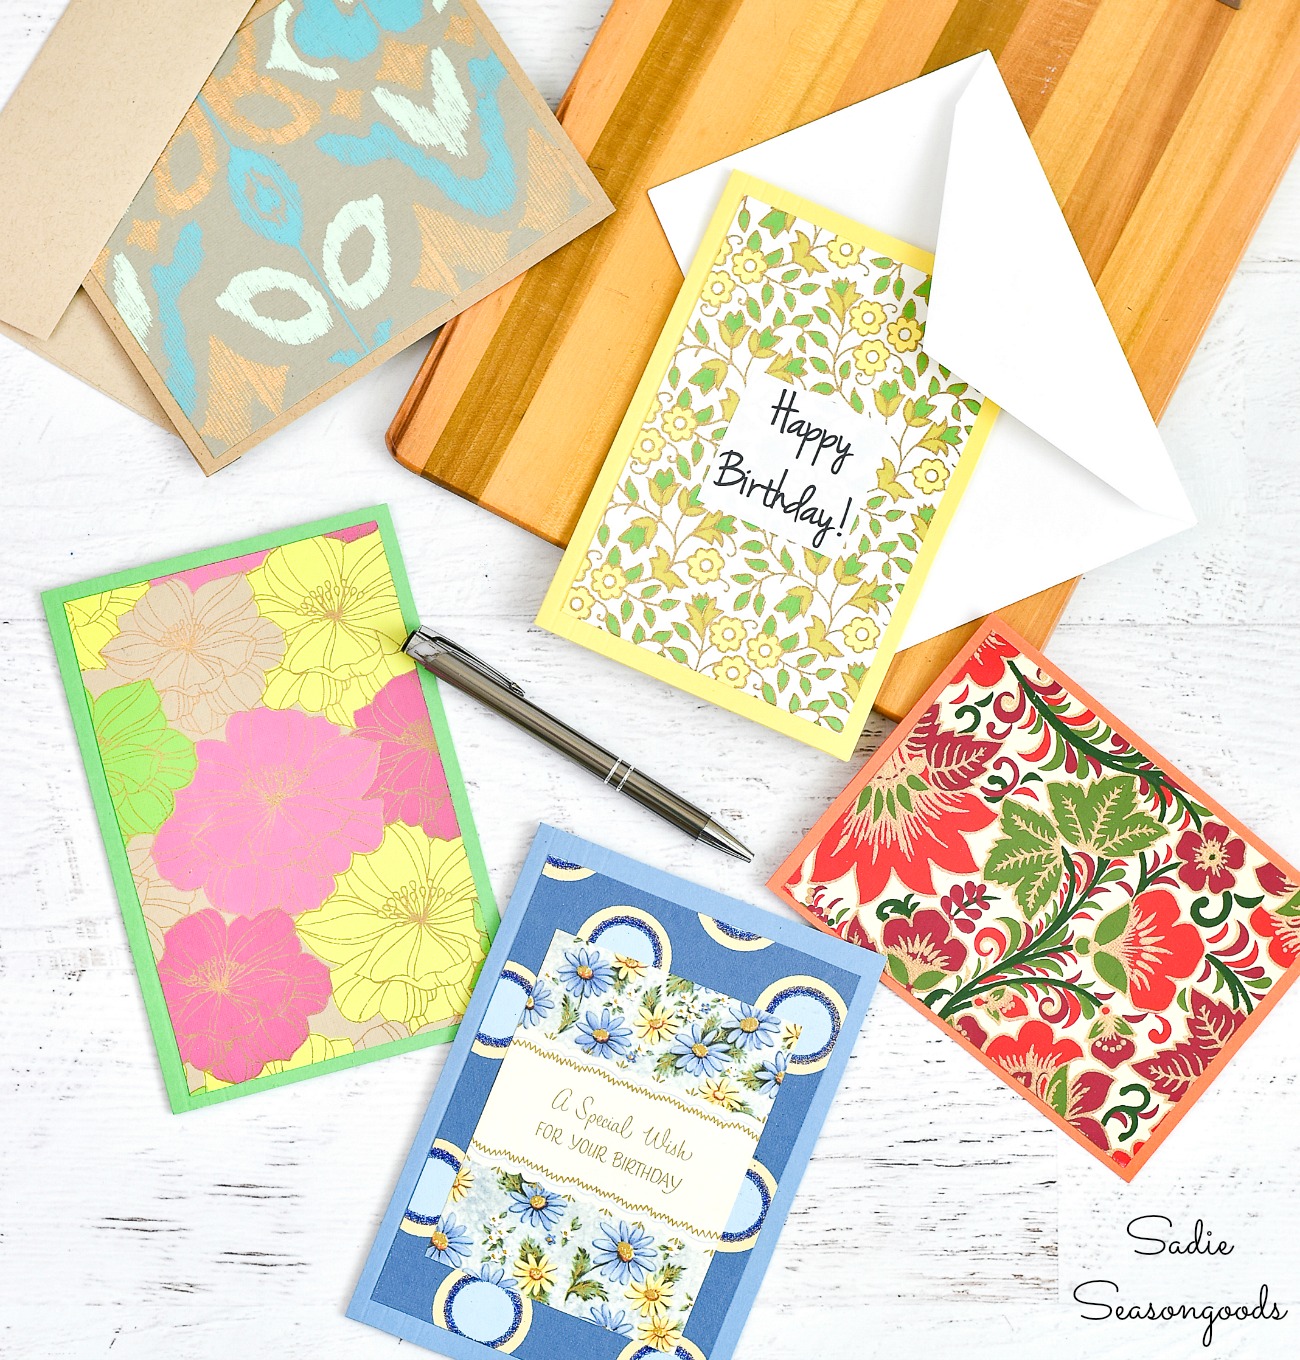 DIY Greeting Cards from File Folders